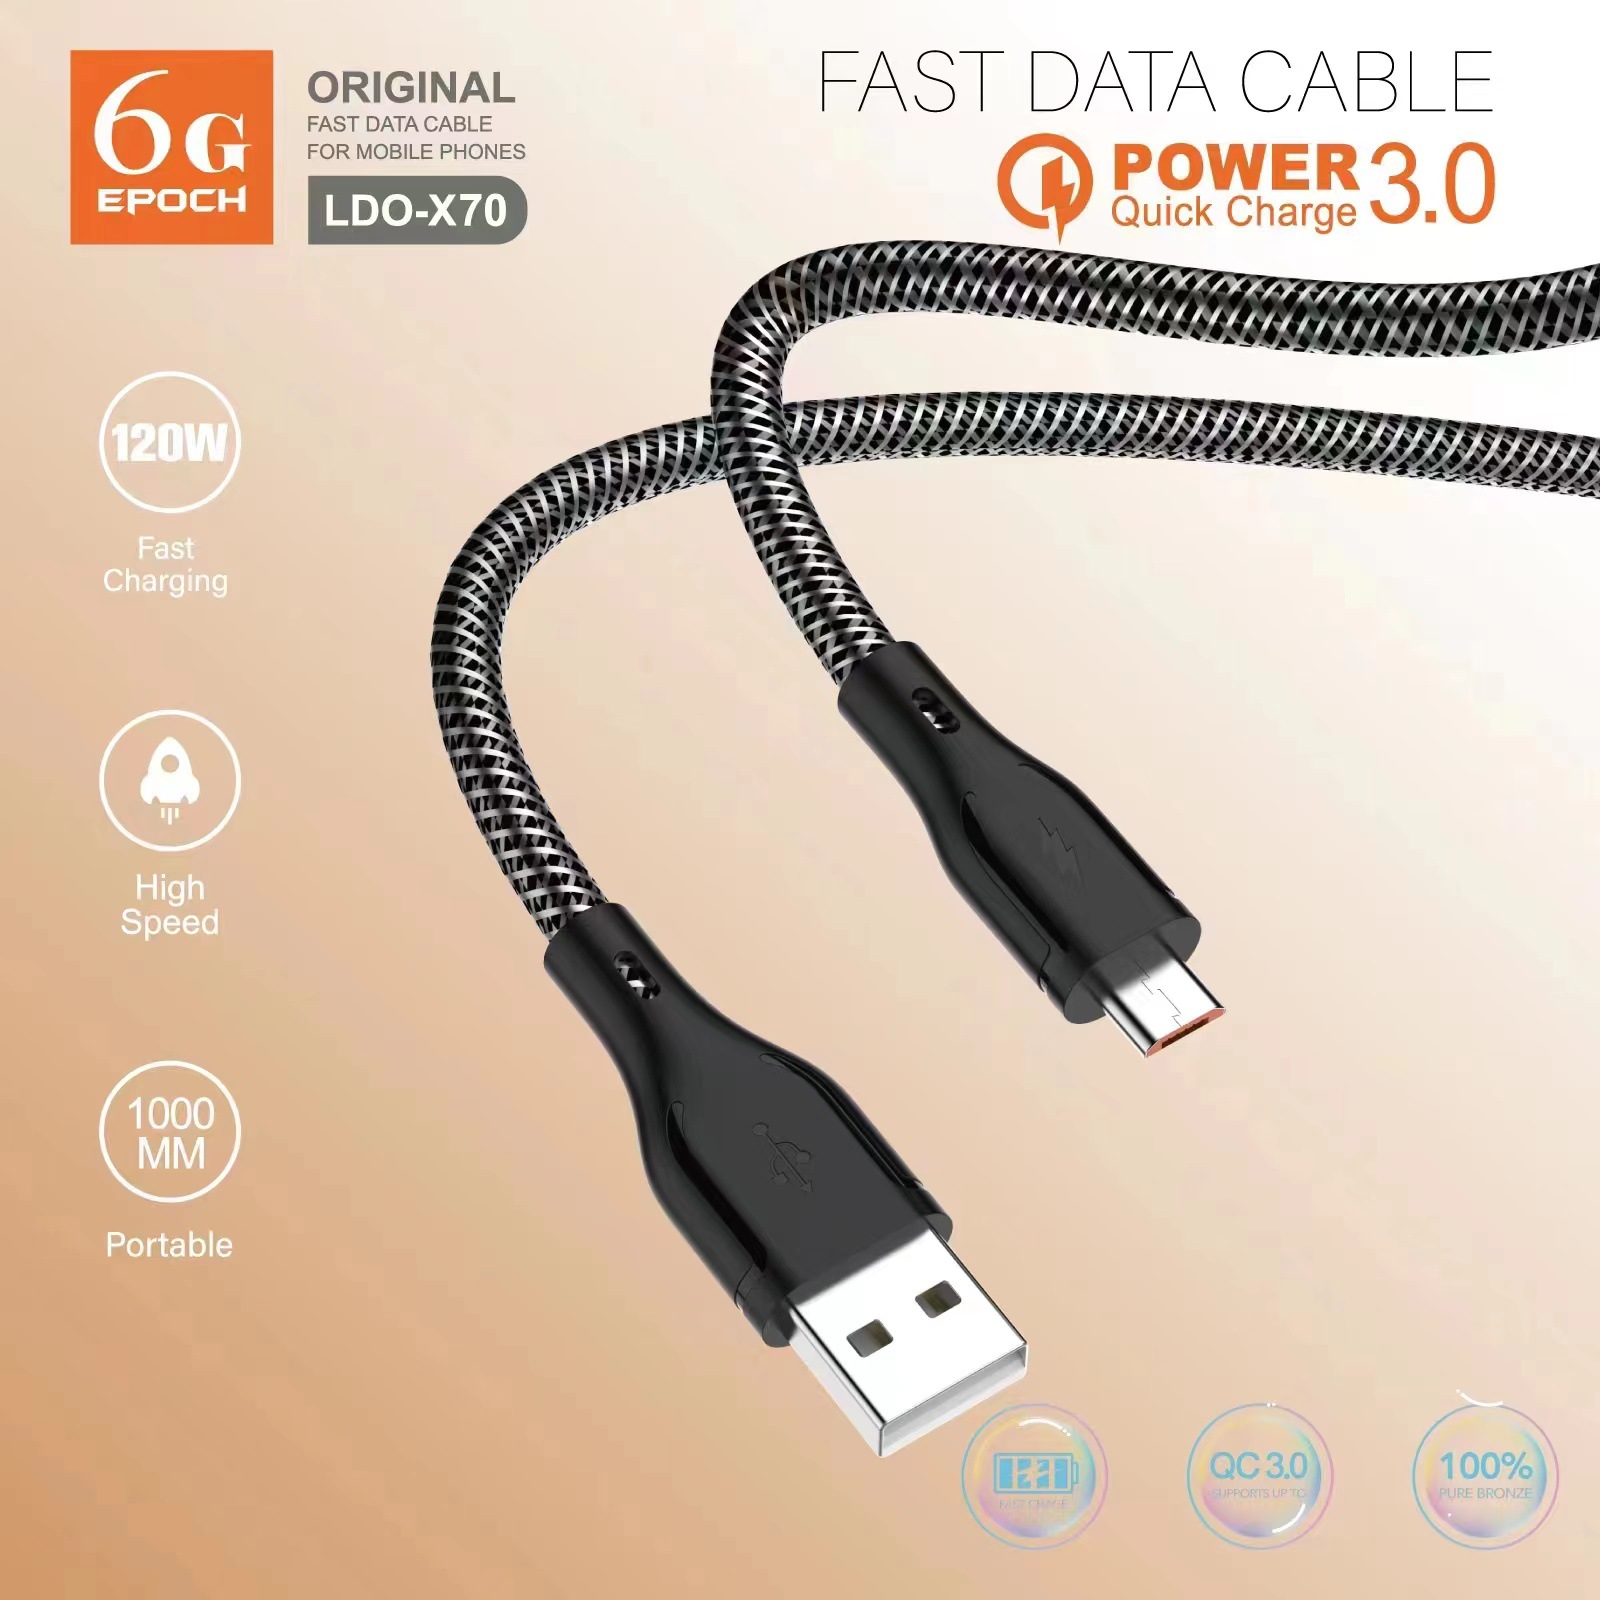 LDO-X70 New Woven Fast Charge Data Cable Support I5 Android Tc Smartphone Qc3.0 Delivery Supported